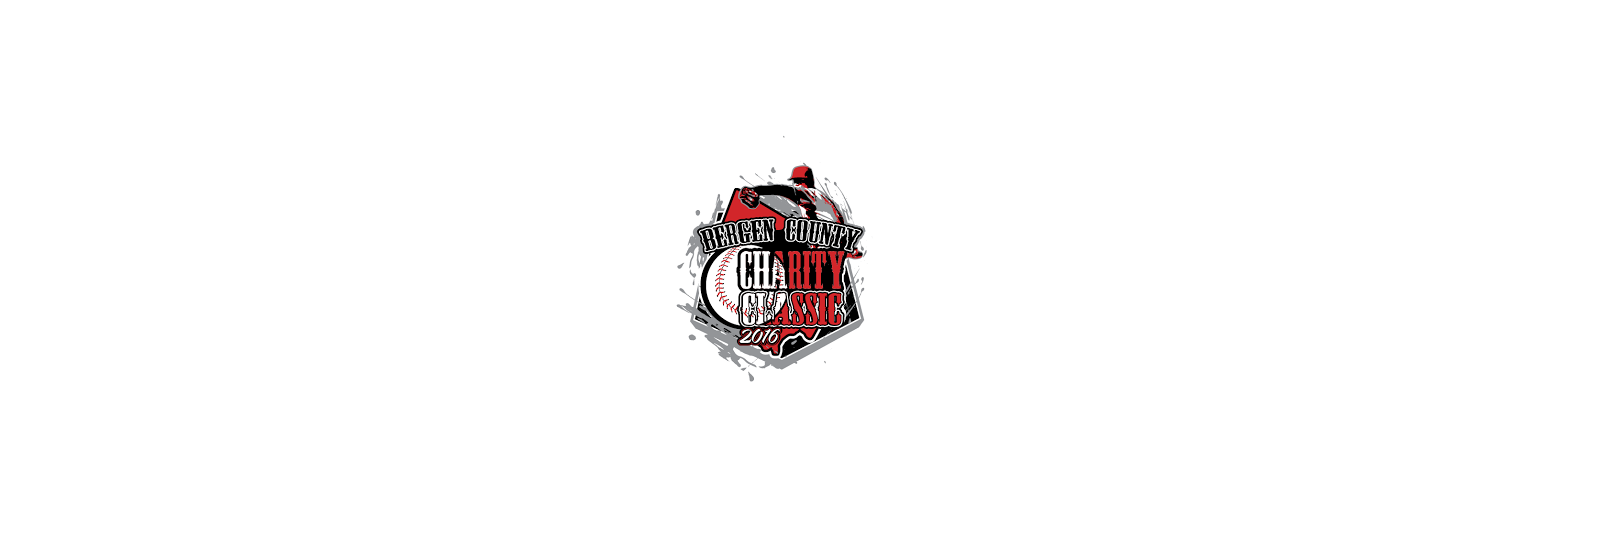 VECTOR LOGO DESIGN FOR PRINT BERGEN COUNTY CHARITY CLASSIC BASEBALL EVENT